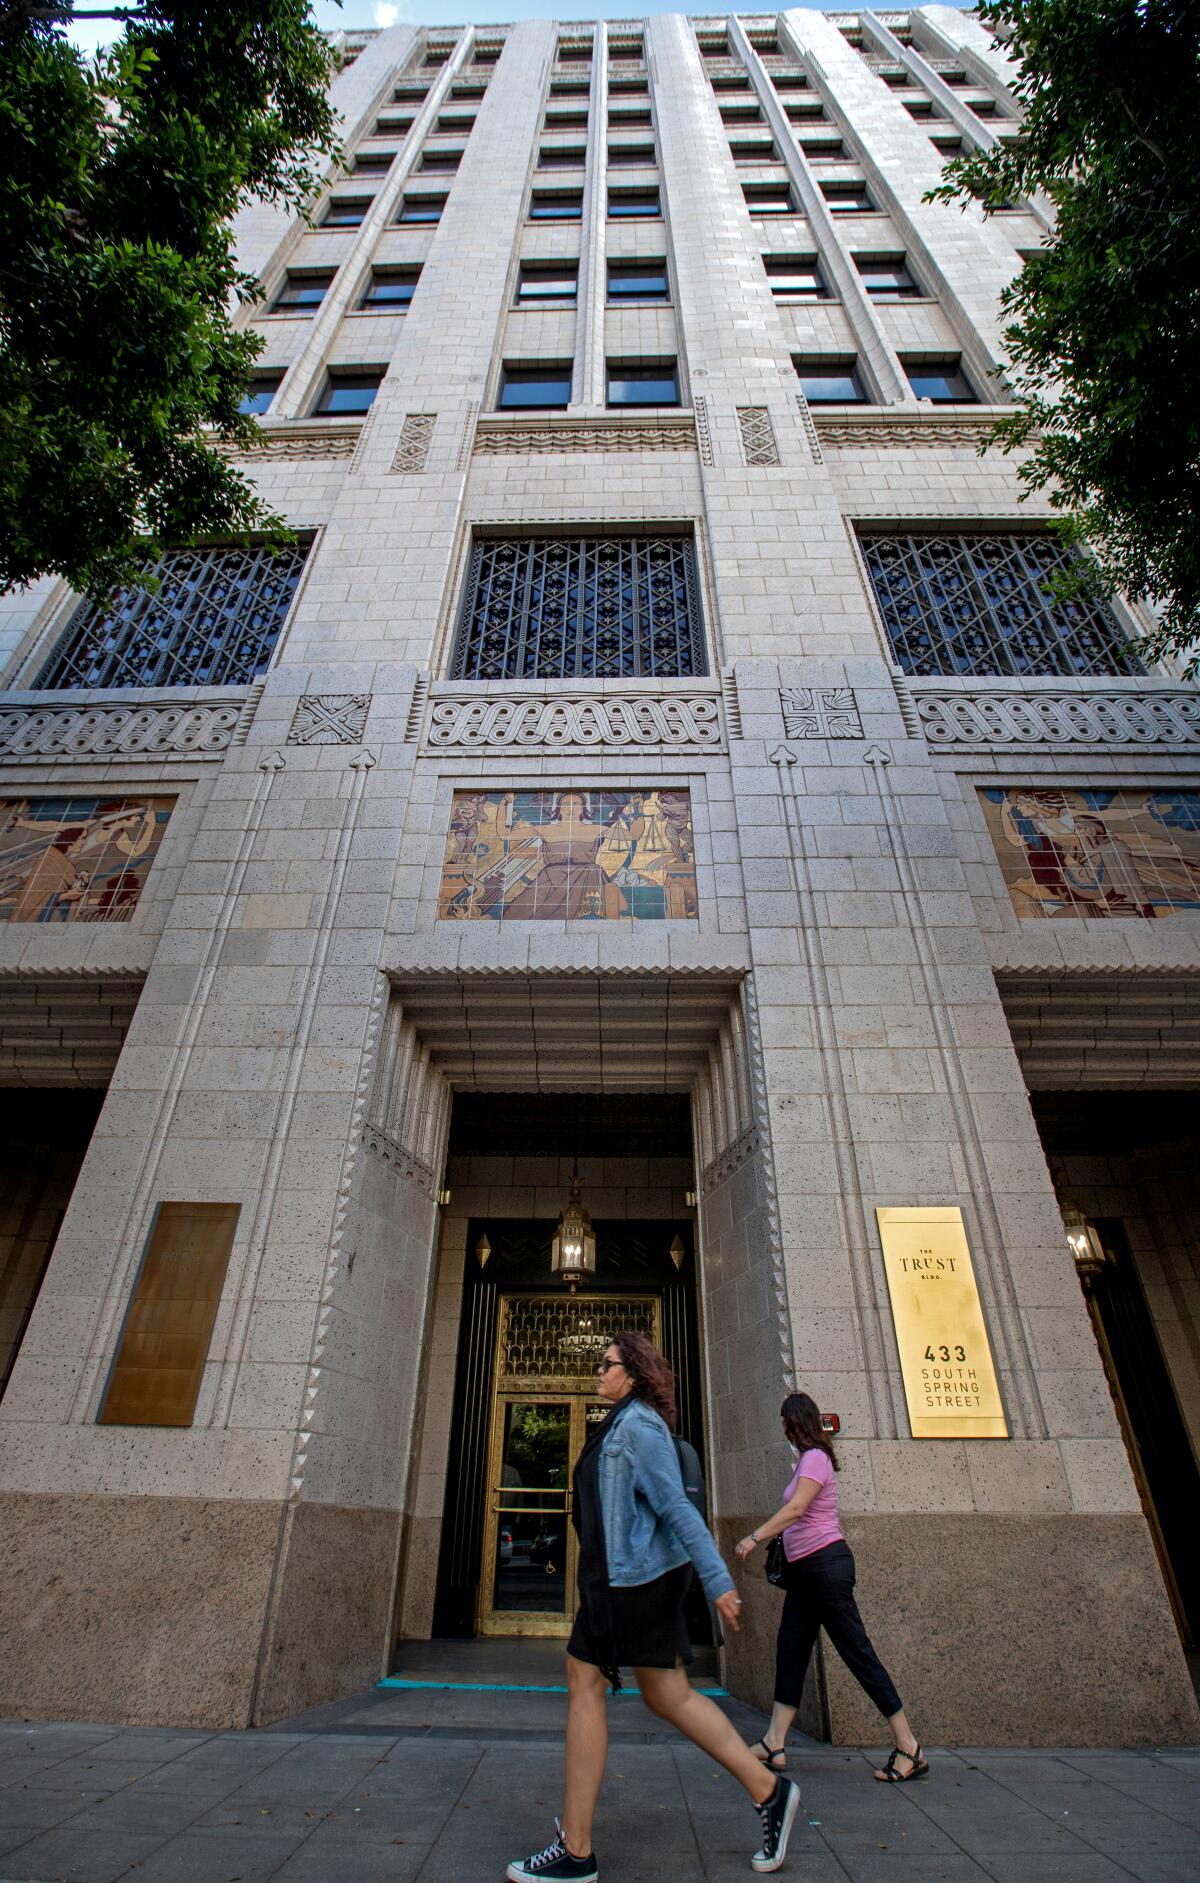 A vertical exterior of the Trust Building as two women walk in the foreground.